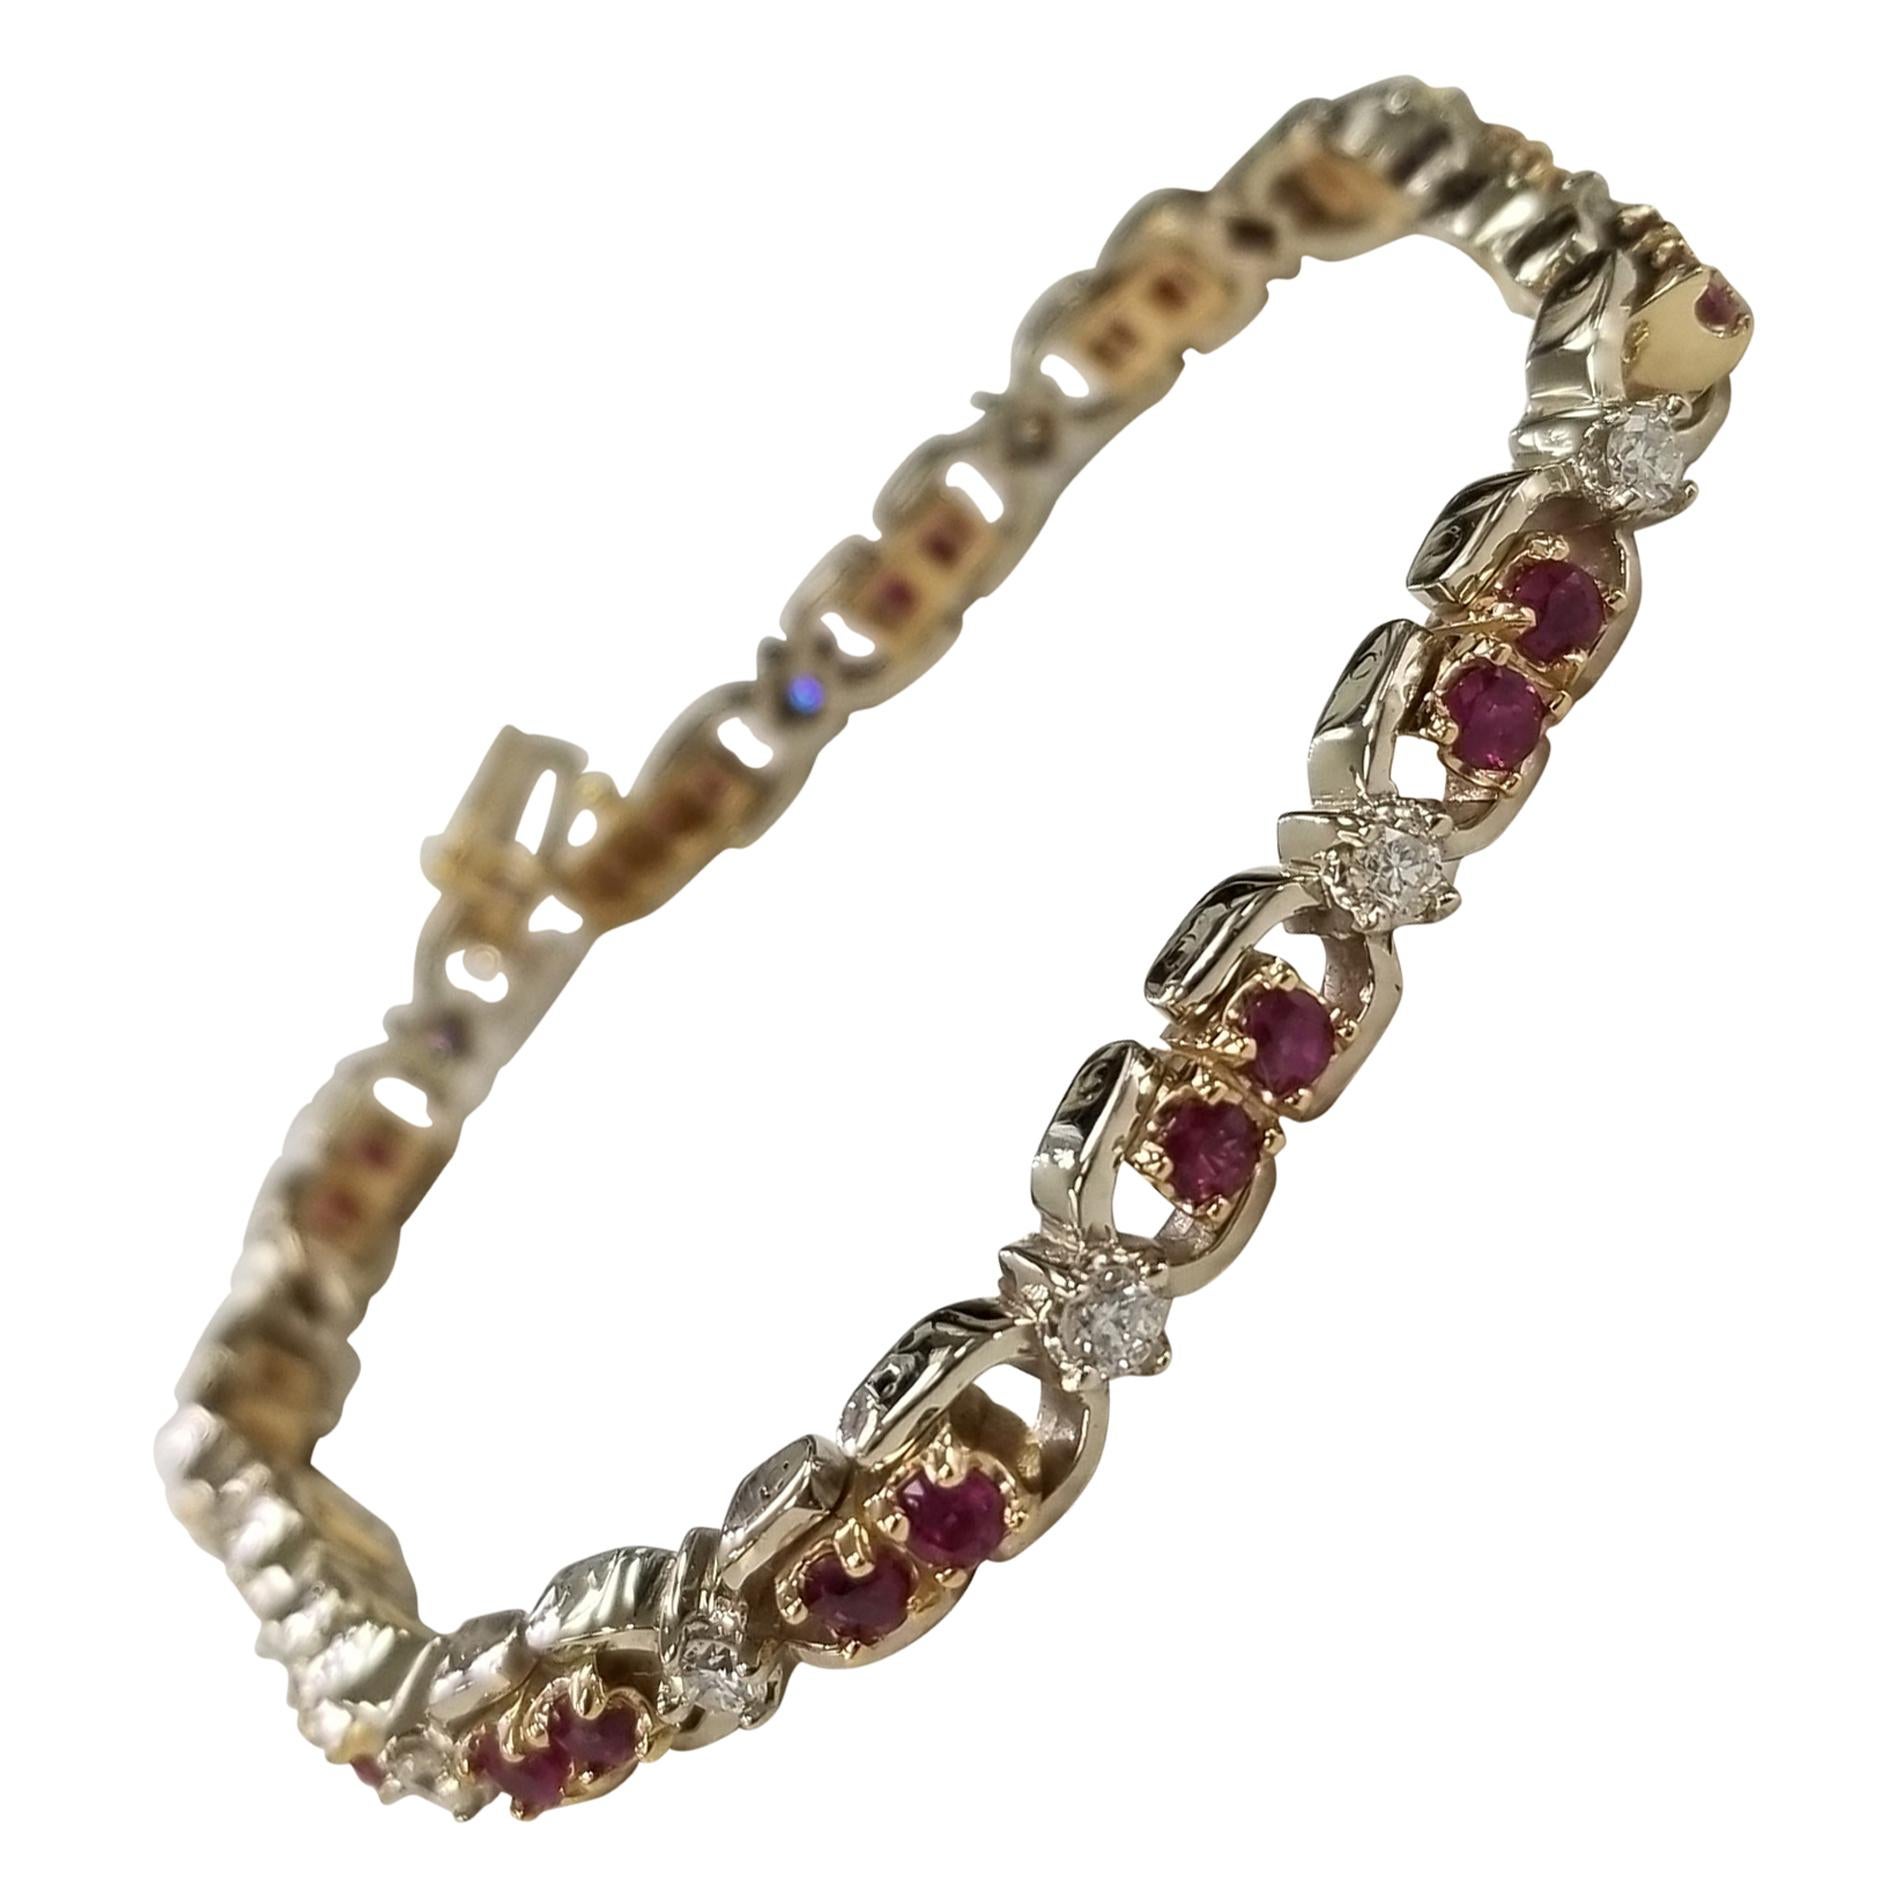 14k 2-Tone Gold Oval Ruby and Diamond Bracelet, Containing 25 Oval Rubies of Gem